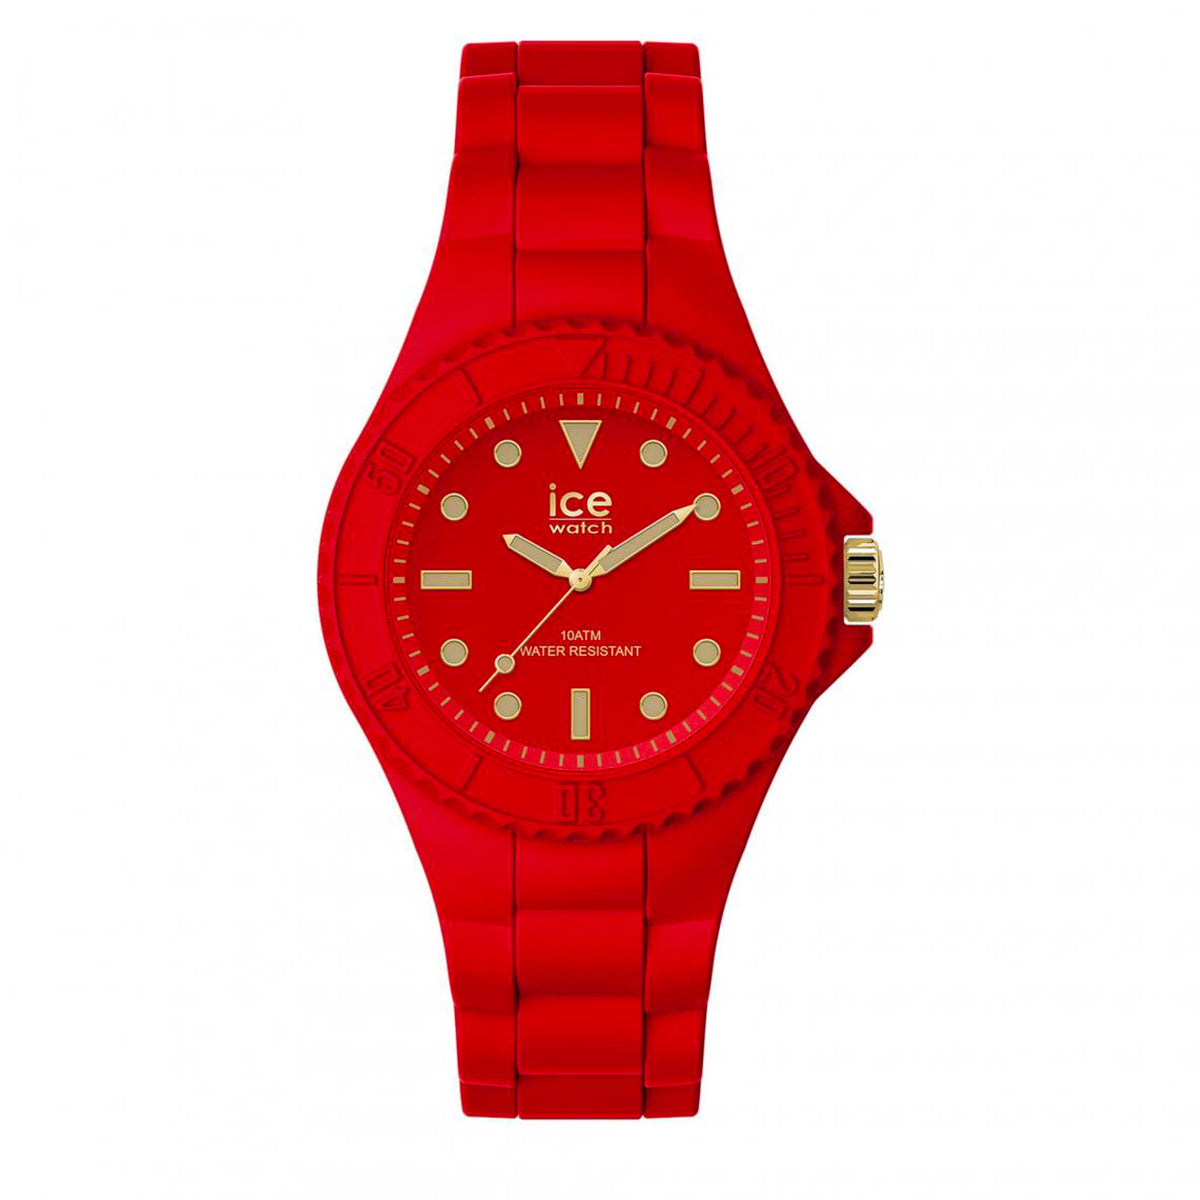 Montre Femme ICE WATCH Rouge 019891